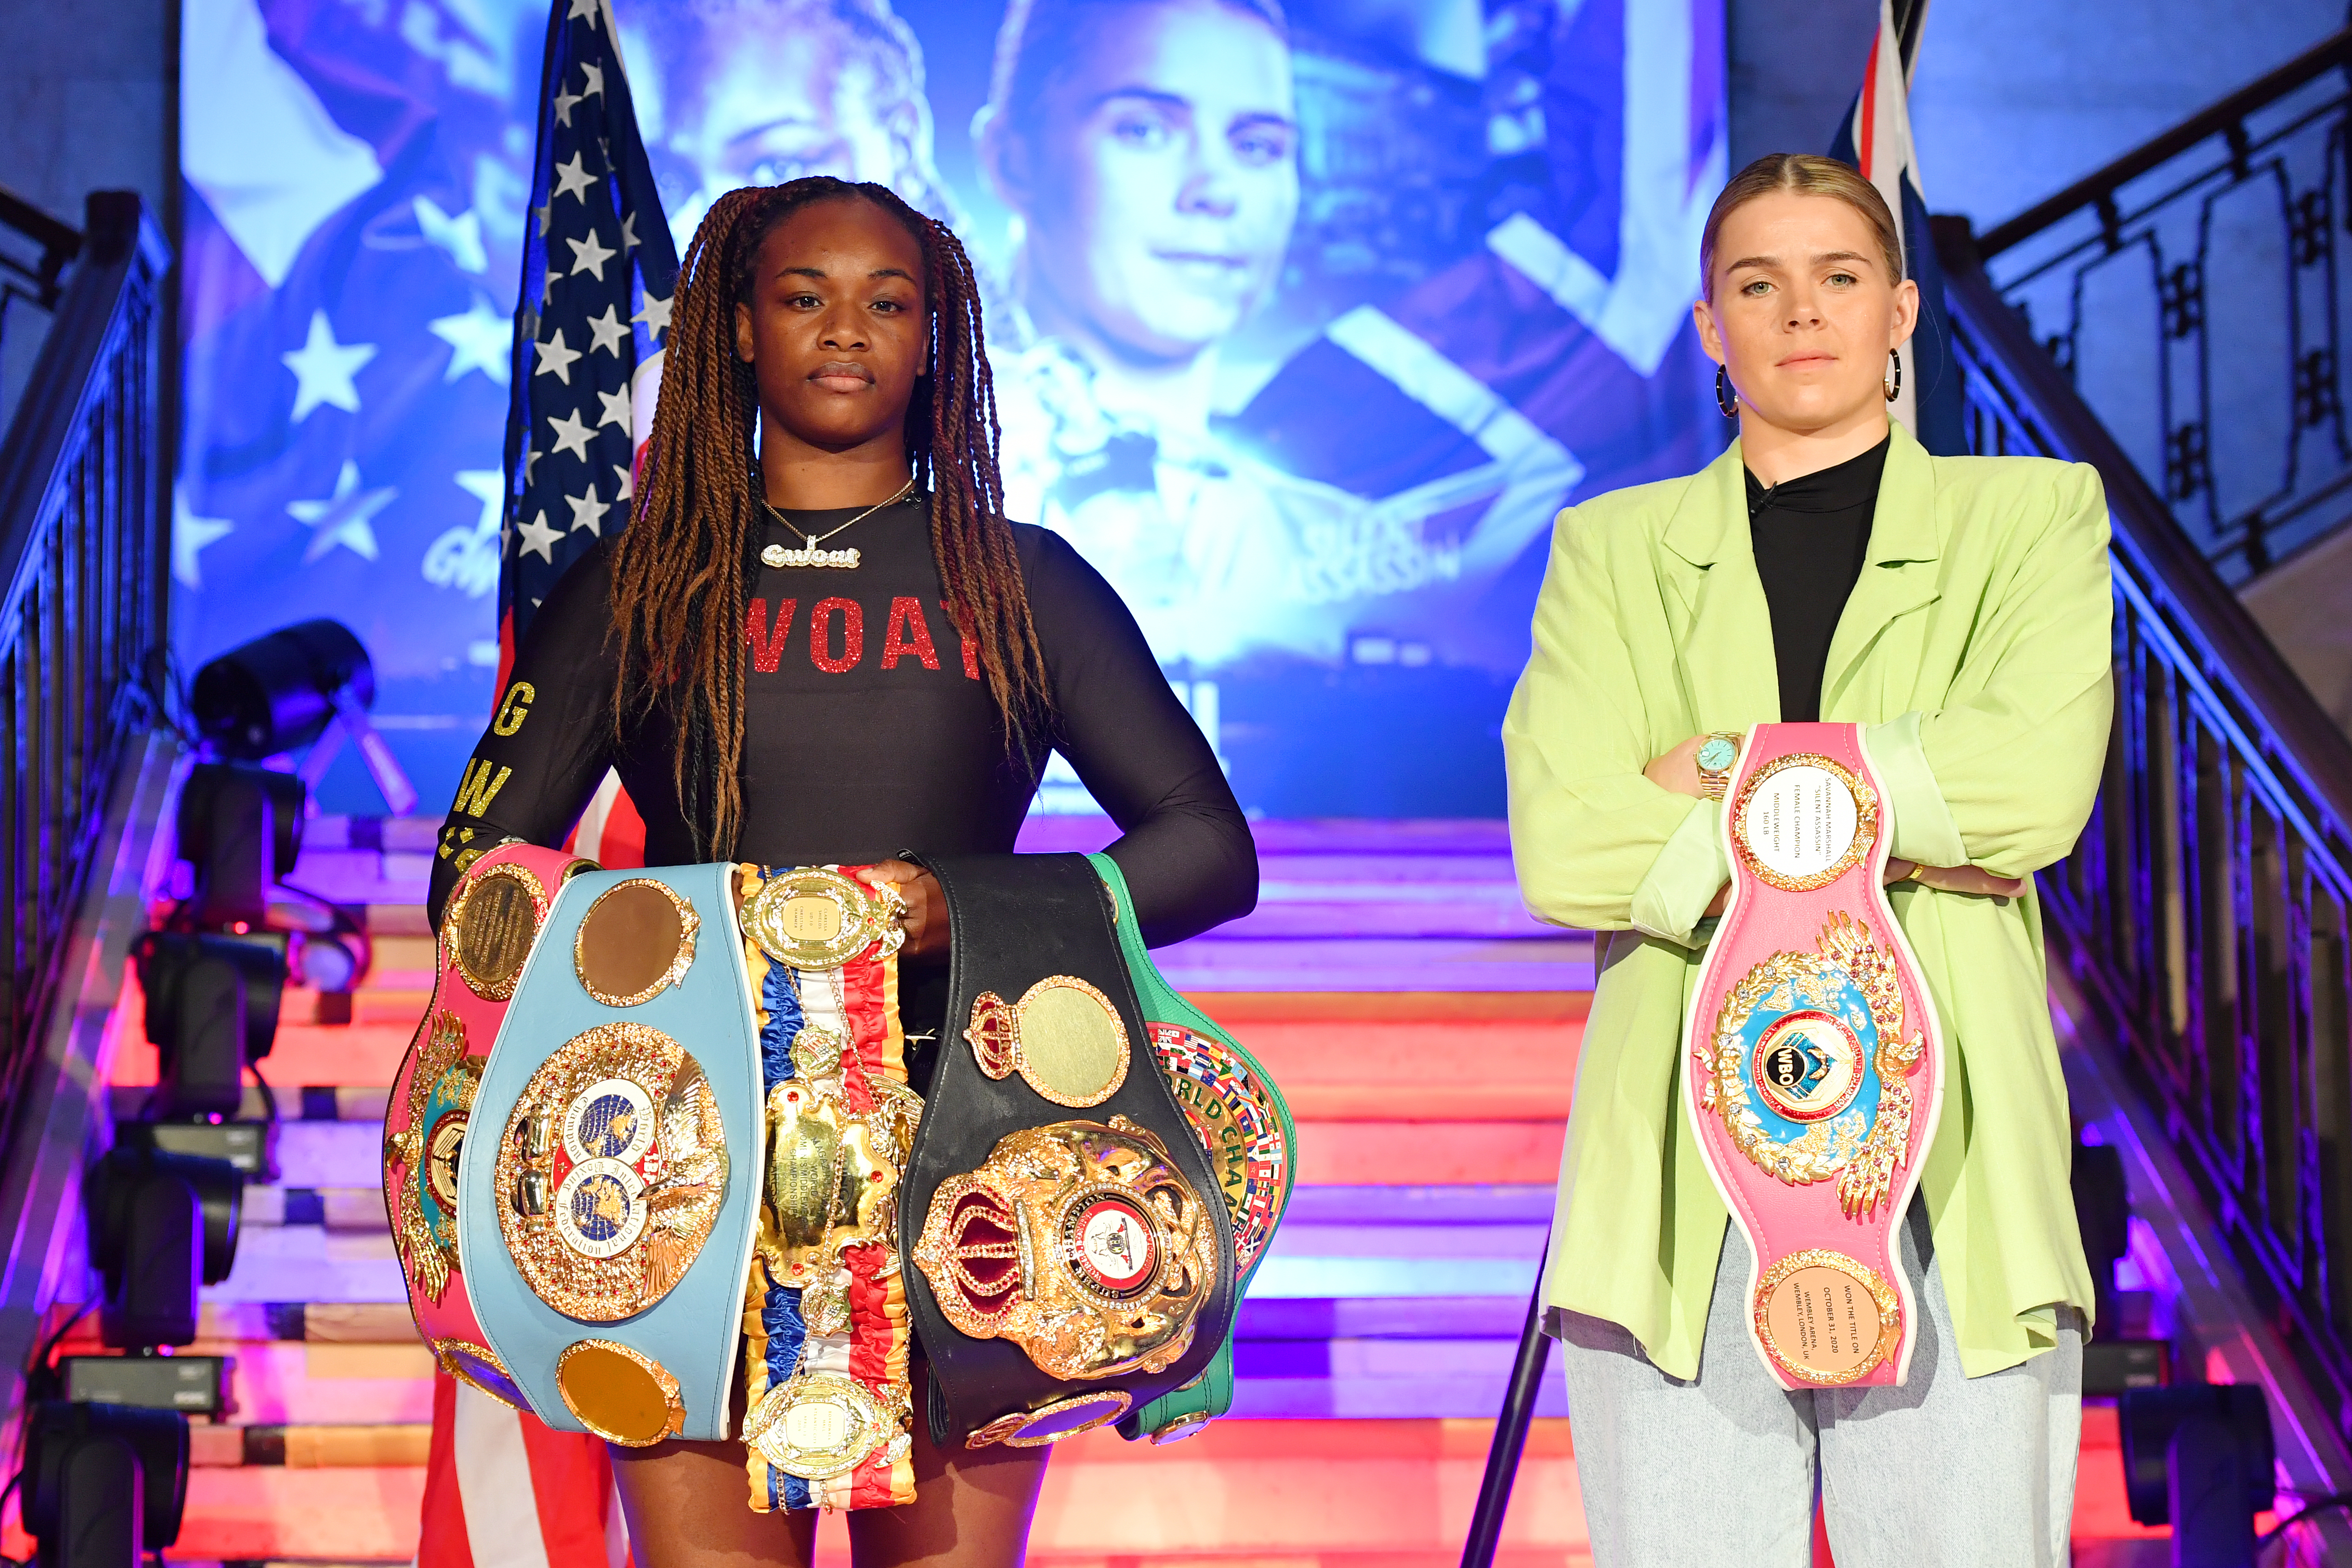 Claressa Shields and Savannah Marshall settle an old score this Saturday in London